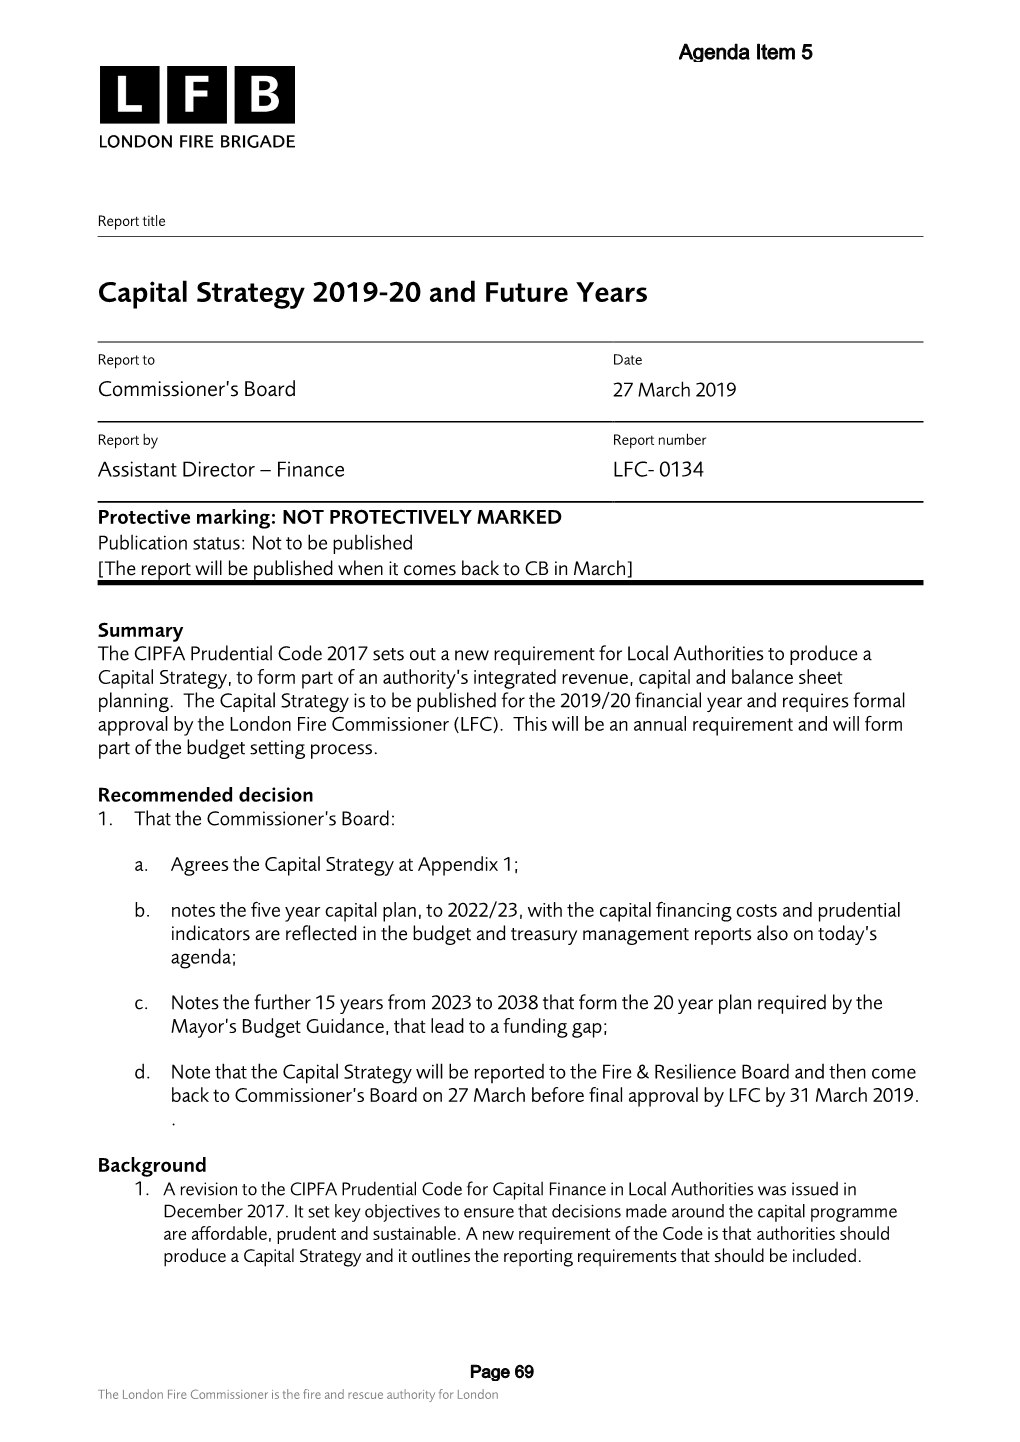 Capital Strategy 2019-20 and Future Years